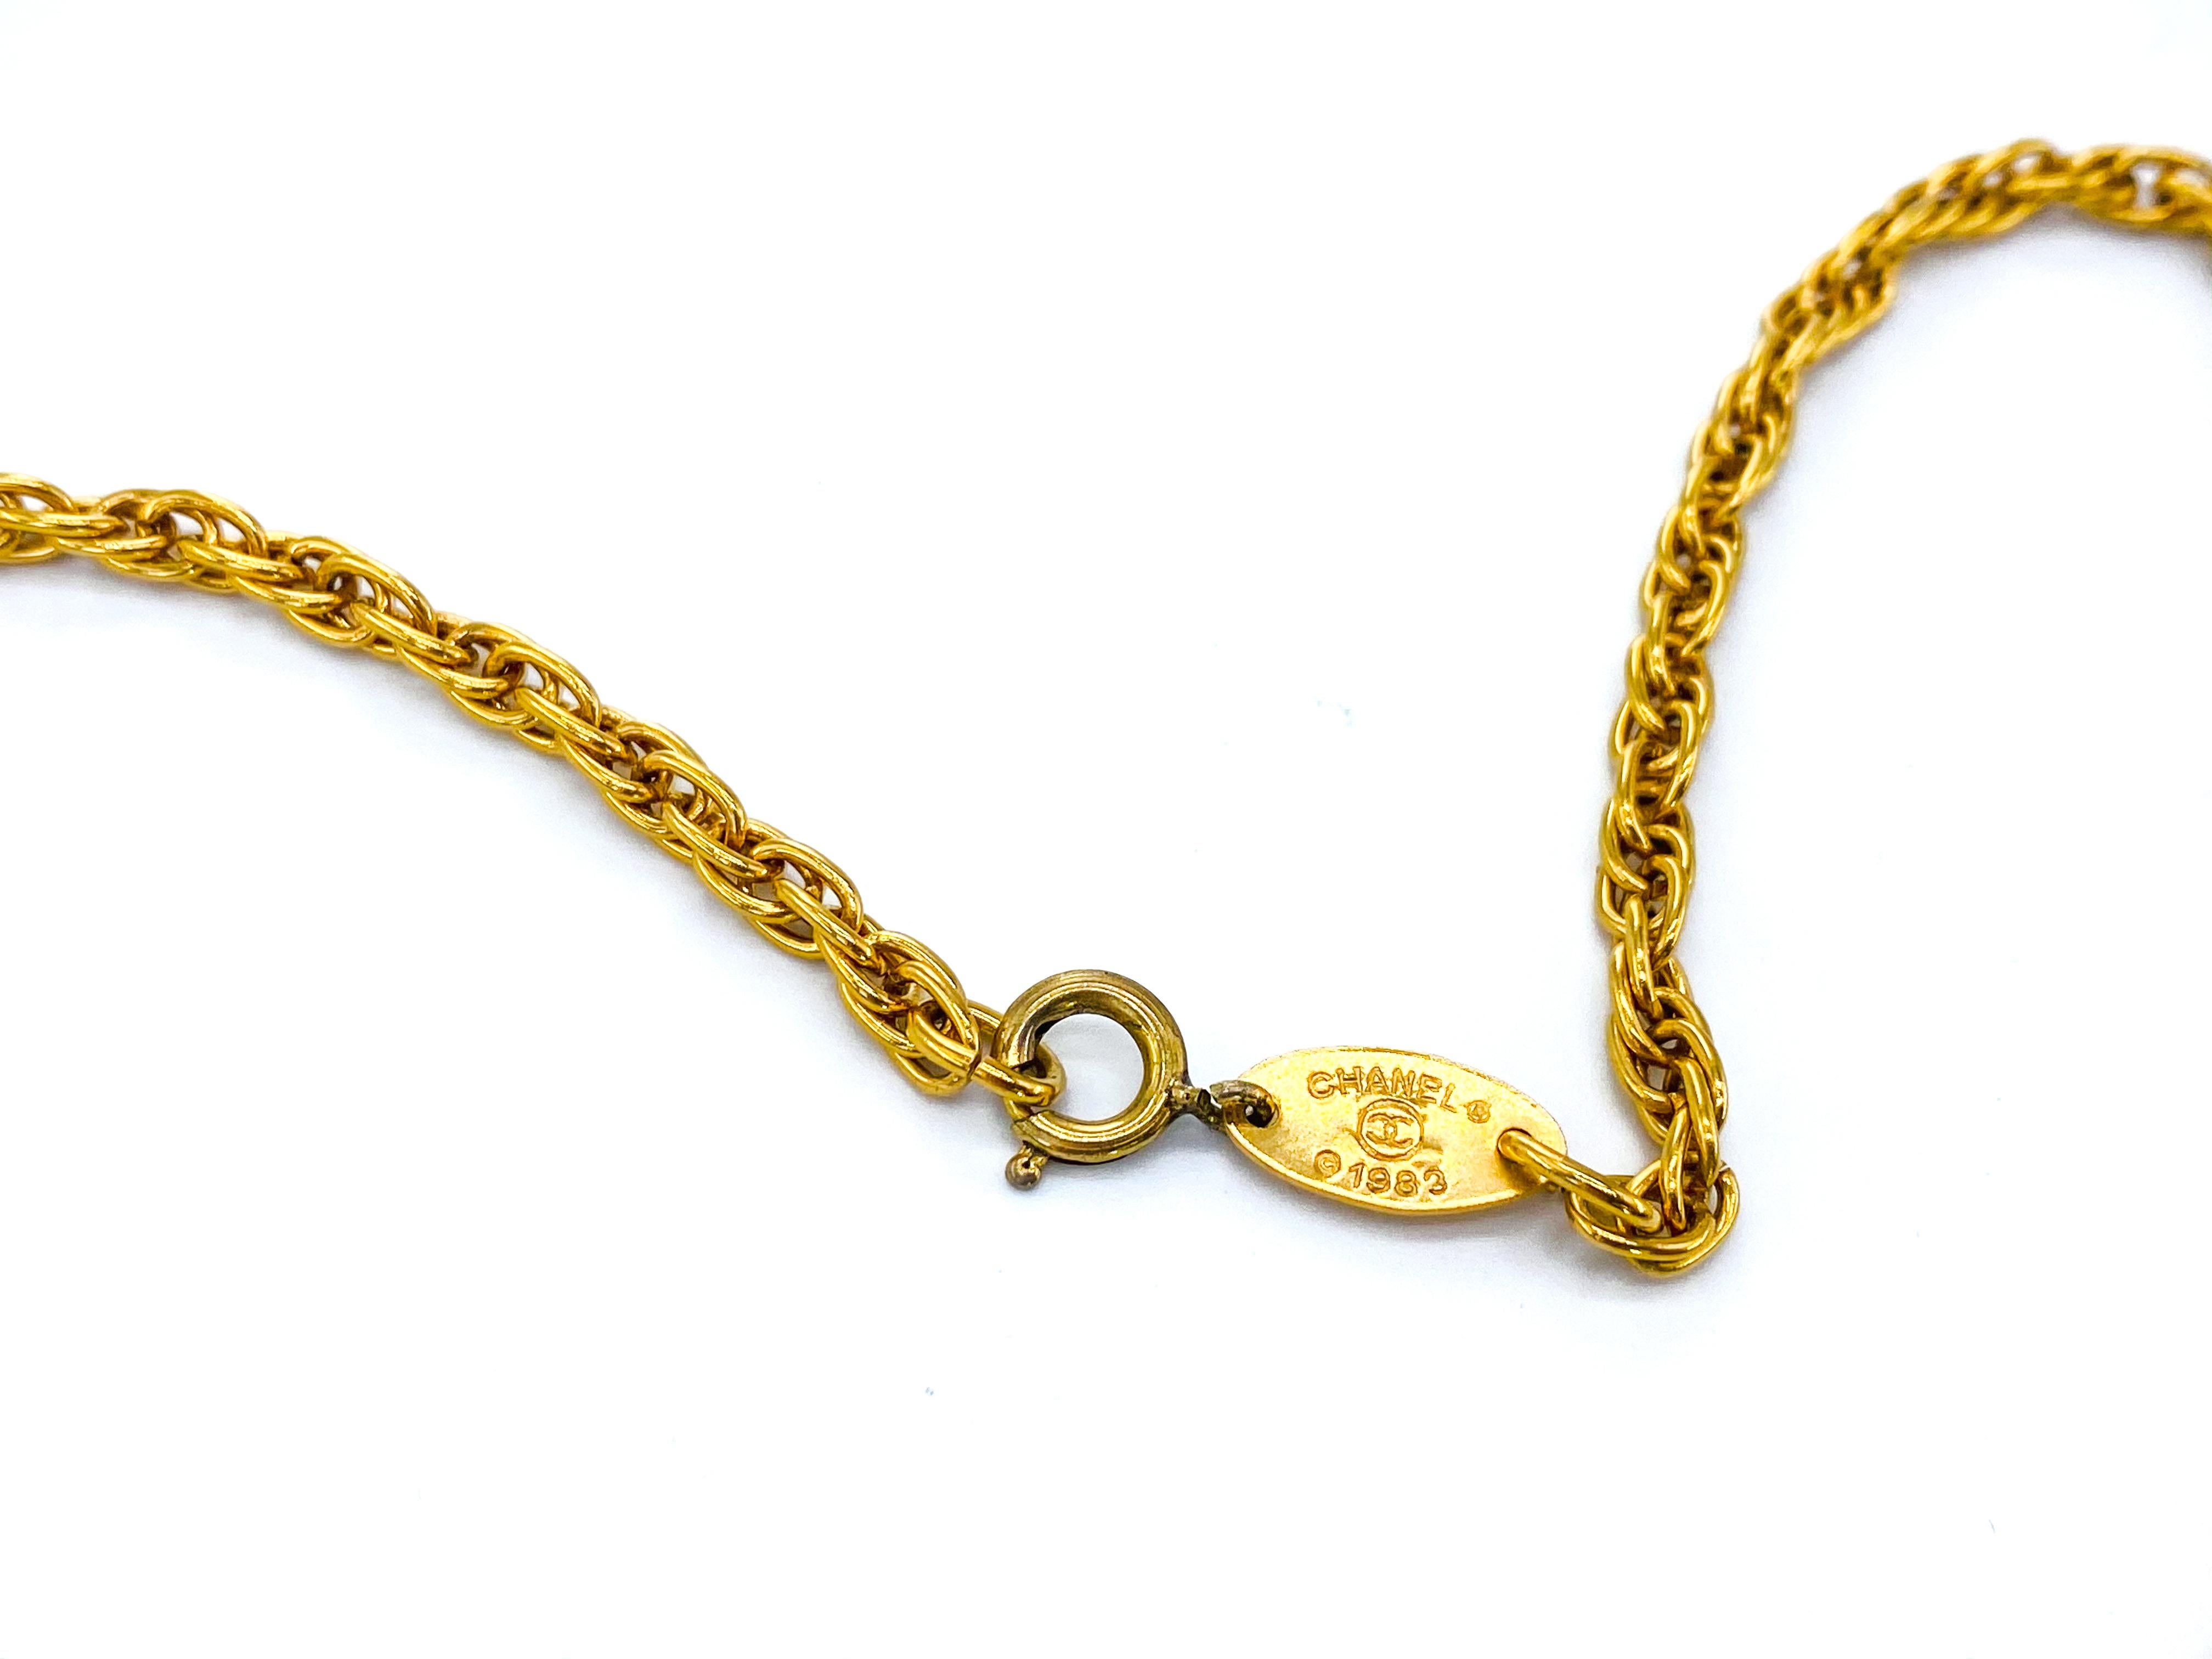 CHANEL Necklace Vintage 1980s Chain Choker 4